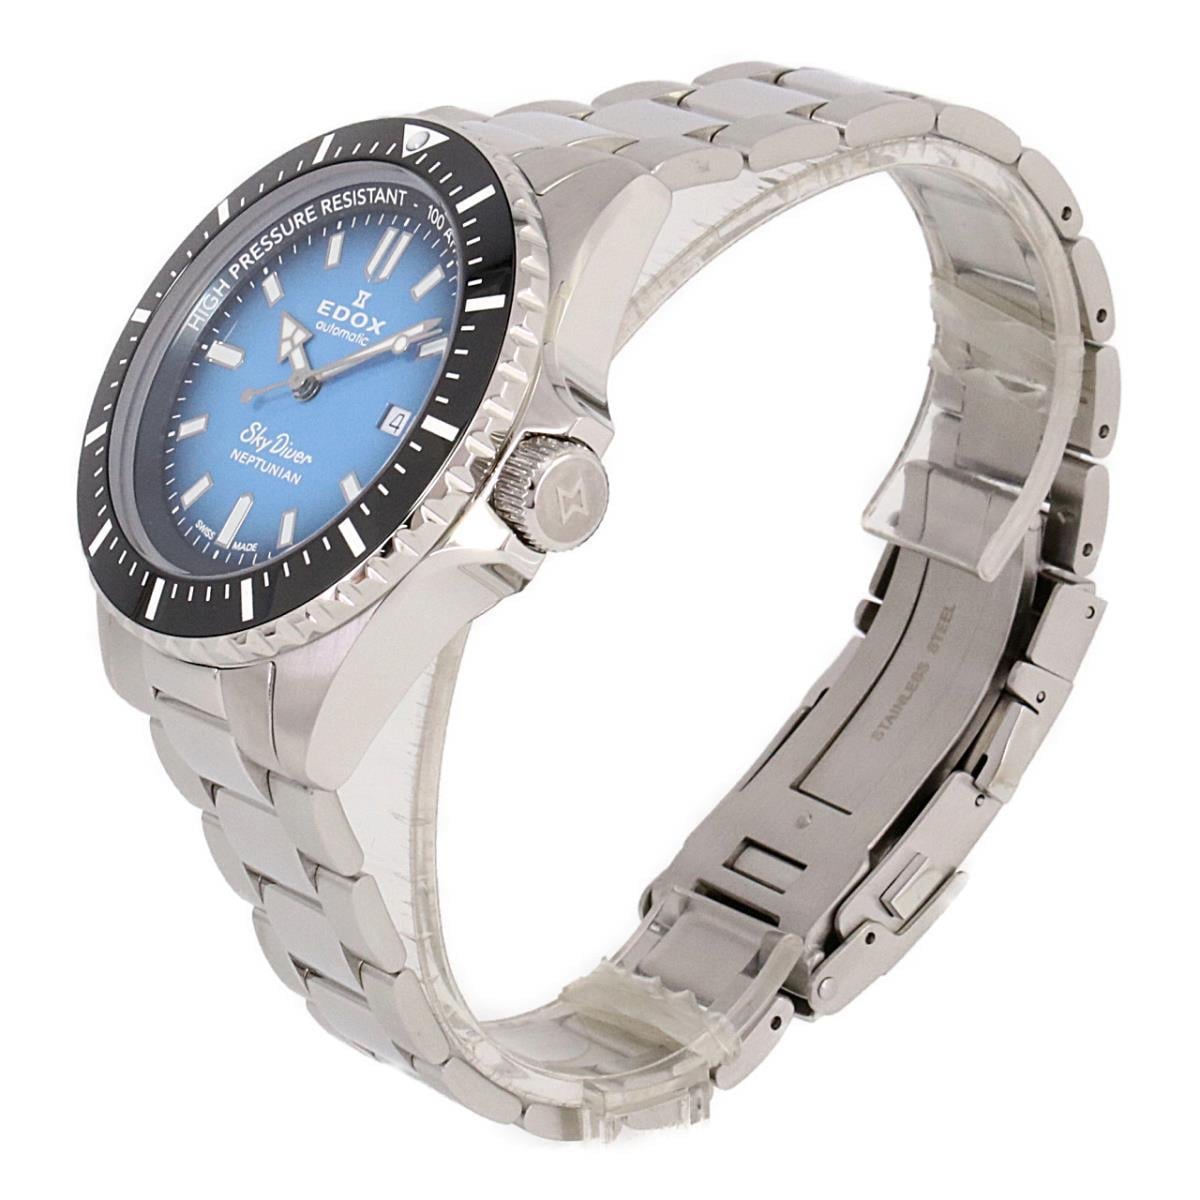 [BRAND NEW] EDOX 80120-3NM-BUIDN Skydiver Neptunian Automatic